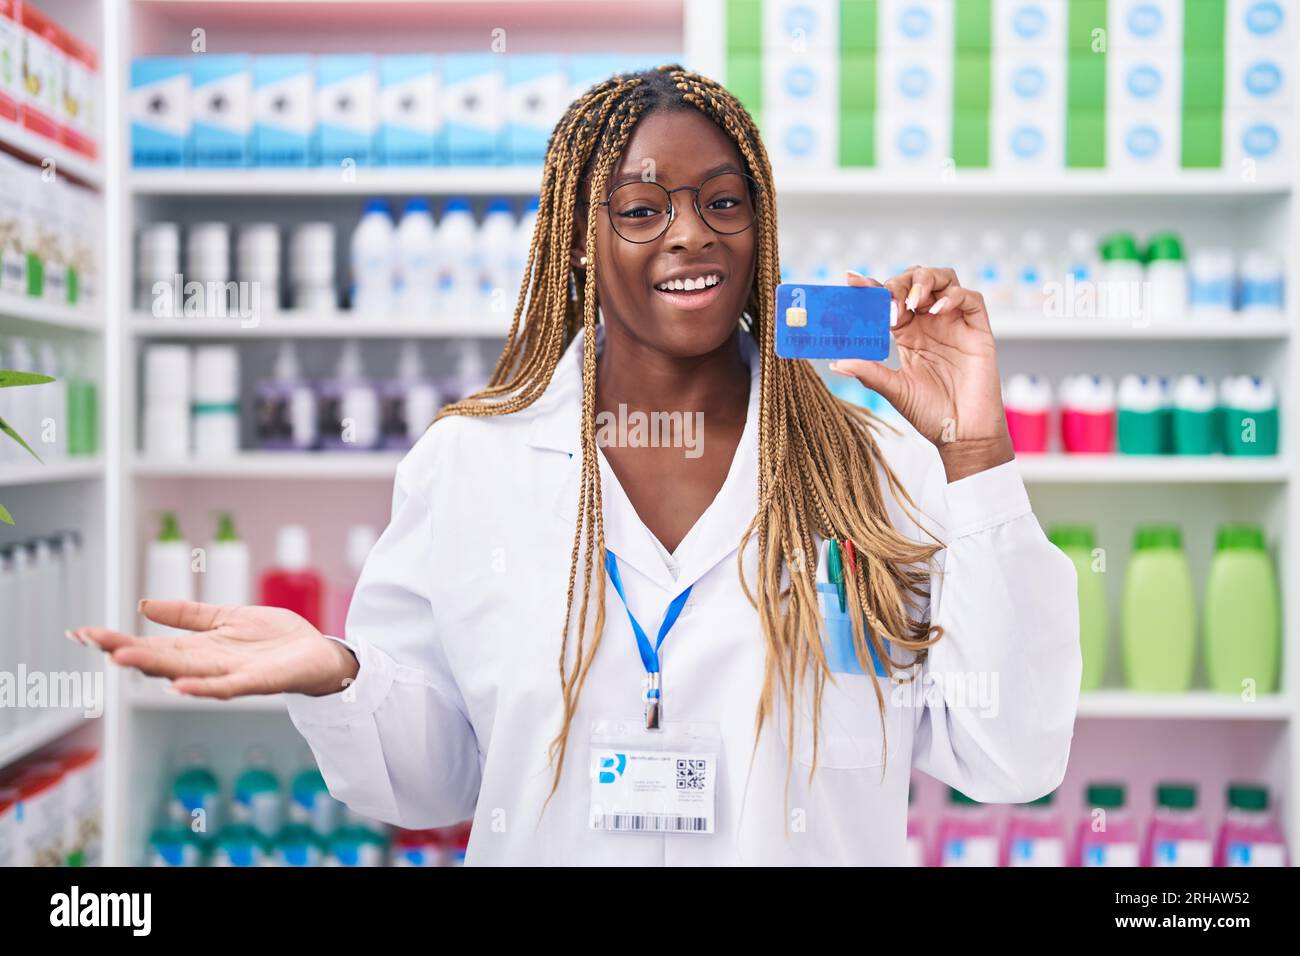 African american woman with braided hair working at pharmacy drugstore holding credit card celebrating achievement with happy smile and winner express Stock Photo